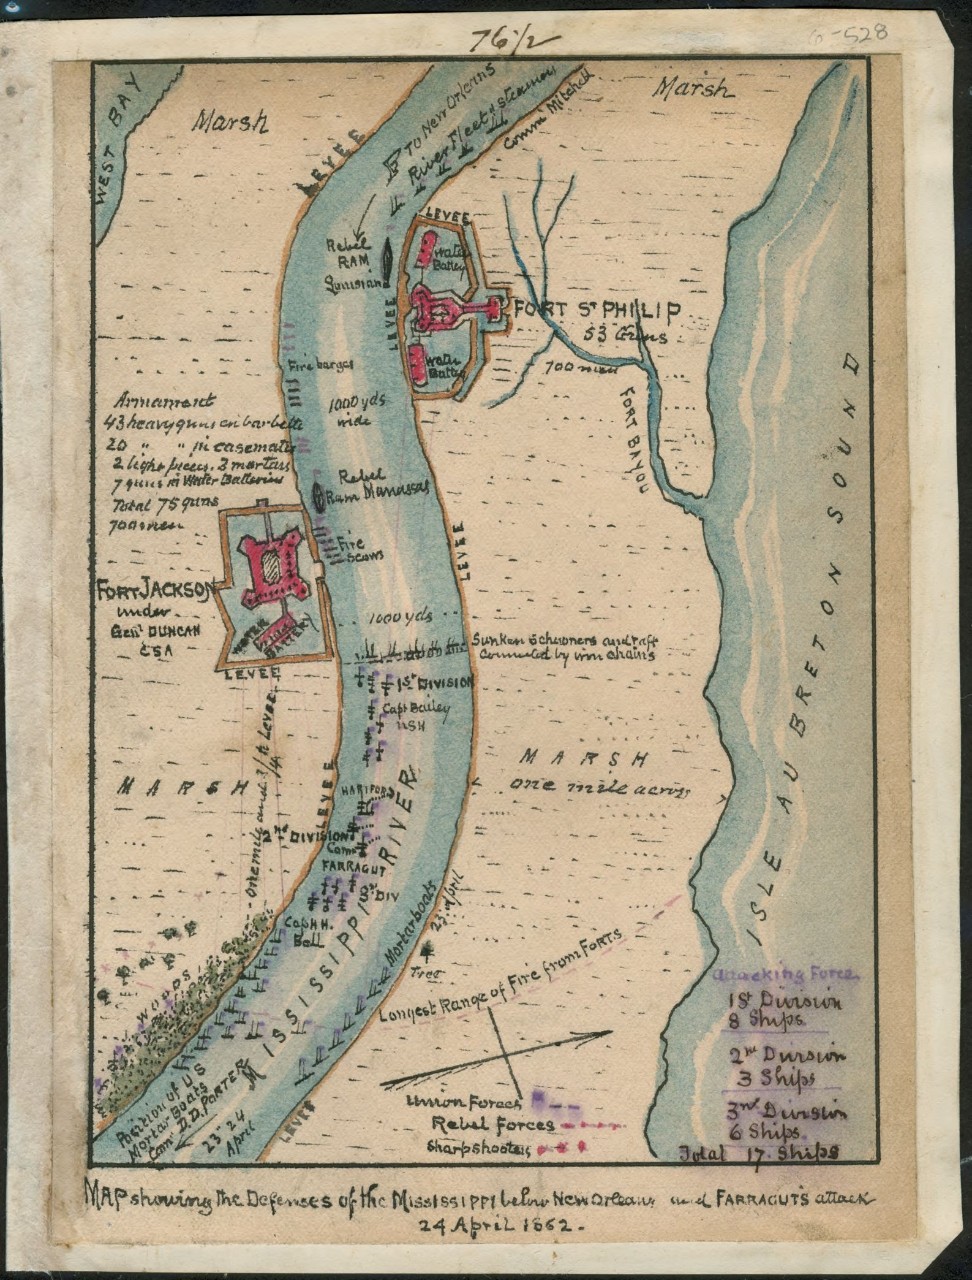 This color map shows how Farragut decisively runs the gauntlet of Confederate fire past New Orleans, La., on 24 April 1862. (Robert Knox Sneden Diary, Mss5:1 Sn237:1 v. 6, p. 528, Virginia Historical Society, Library of Congress)